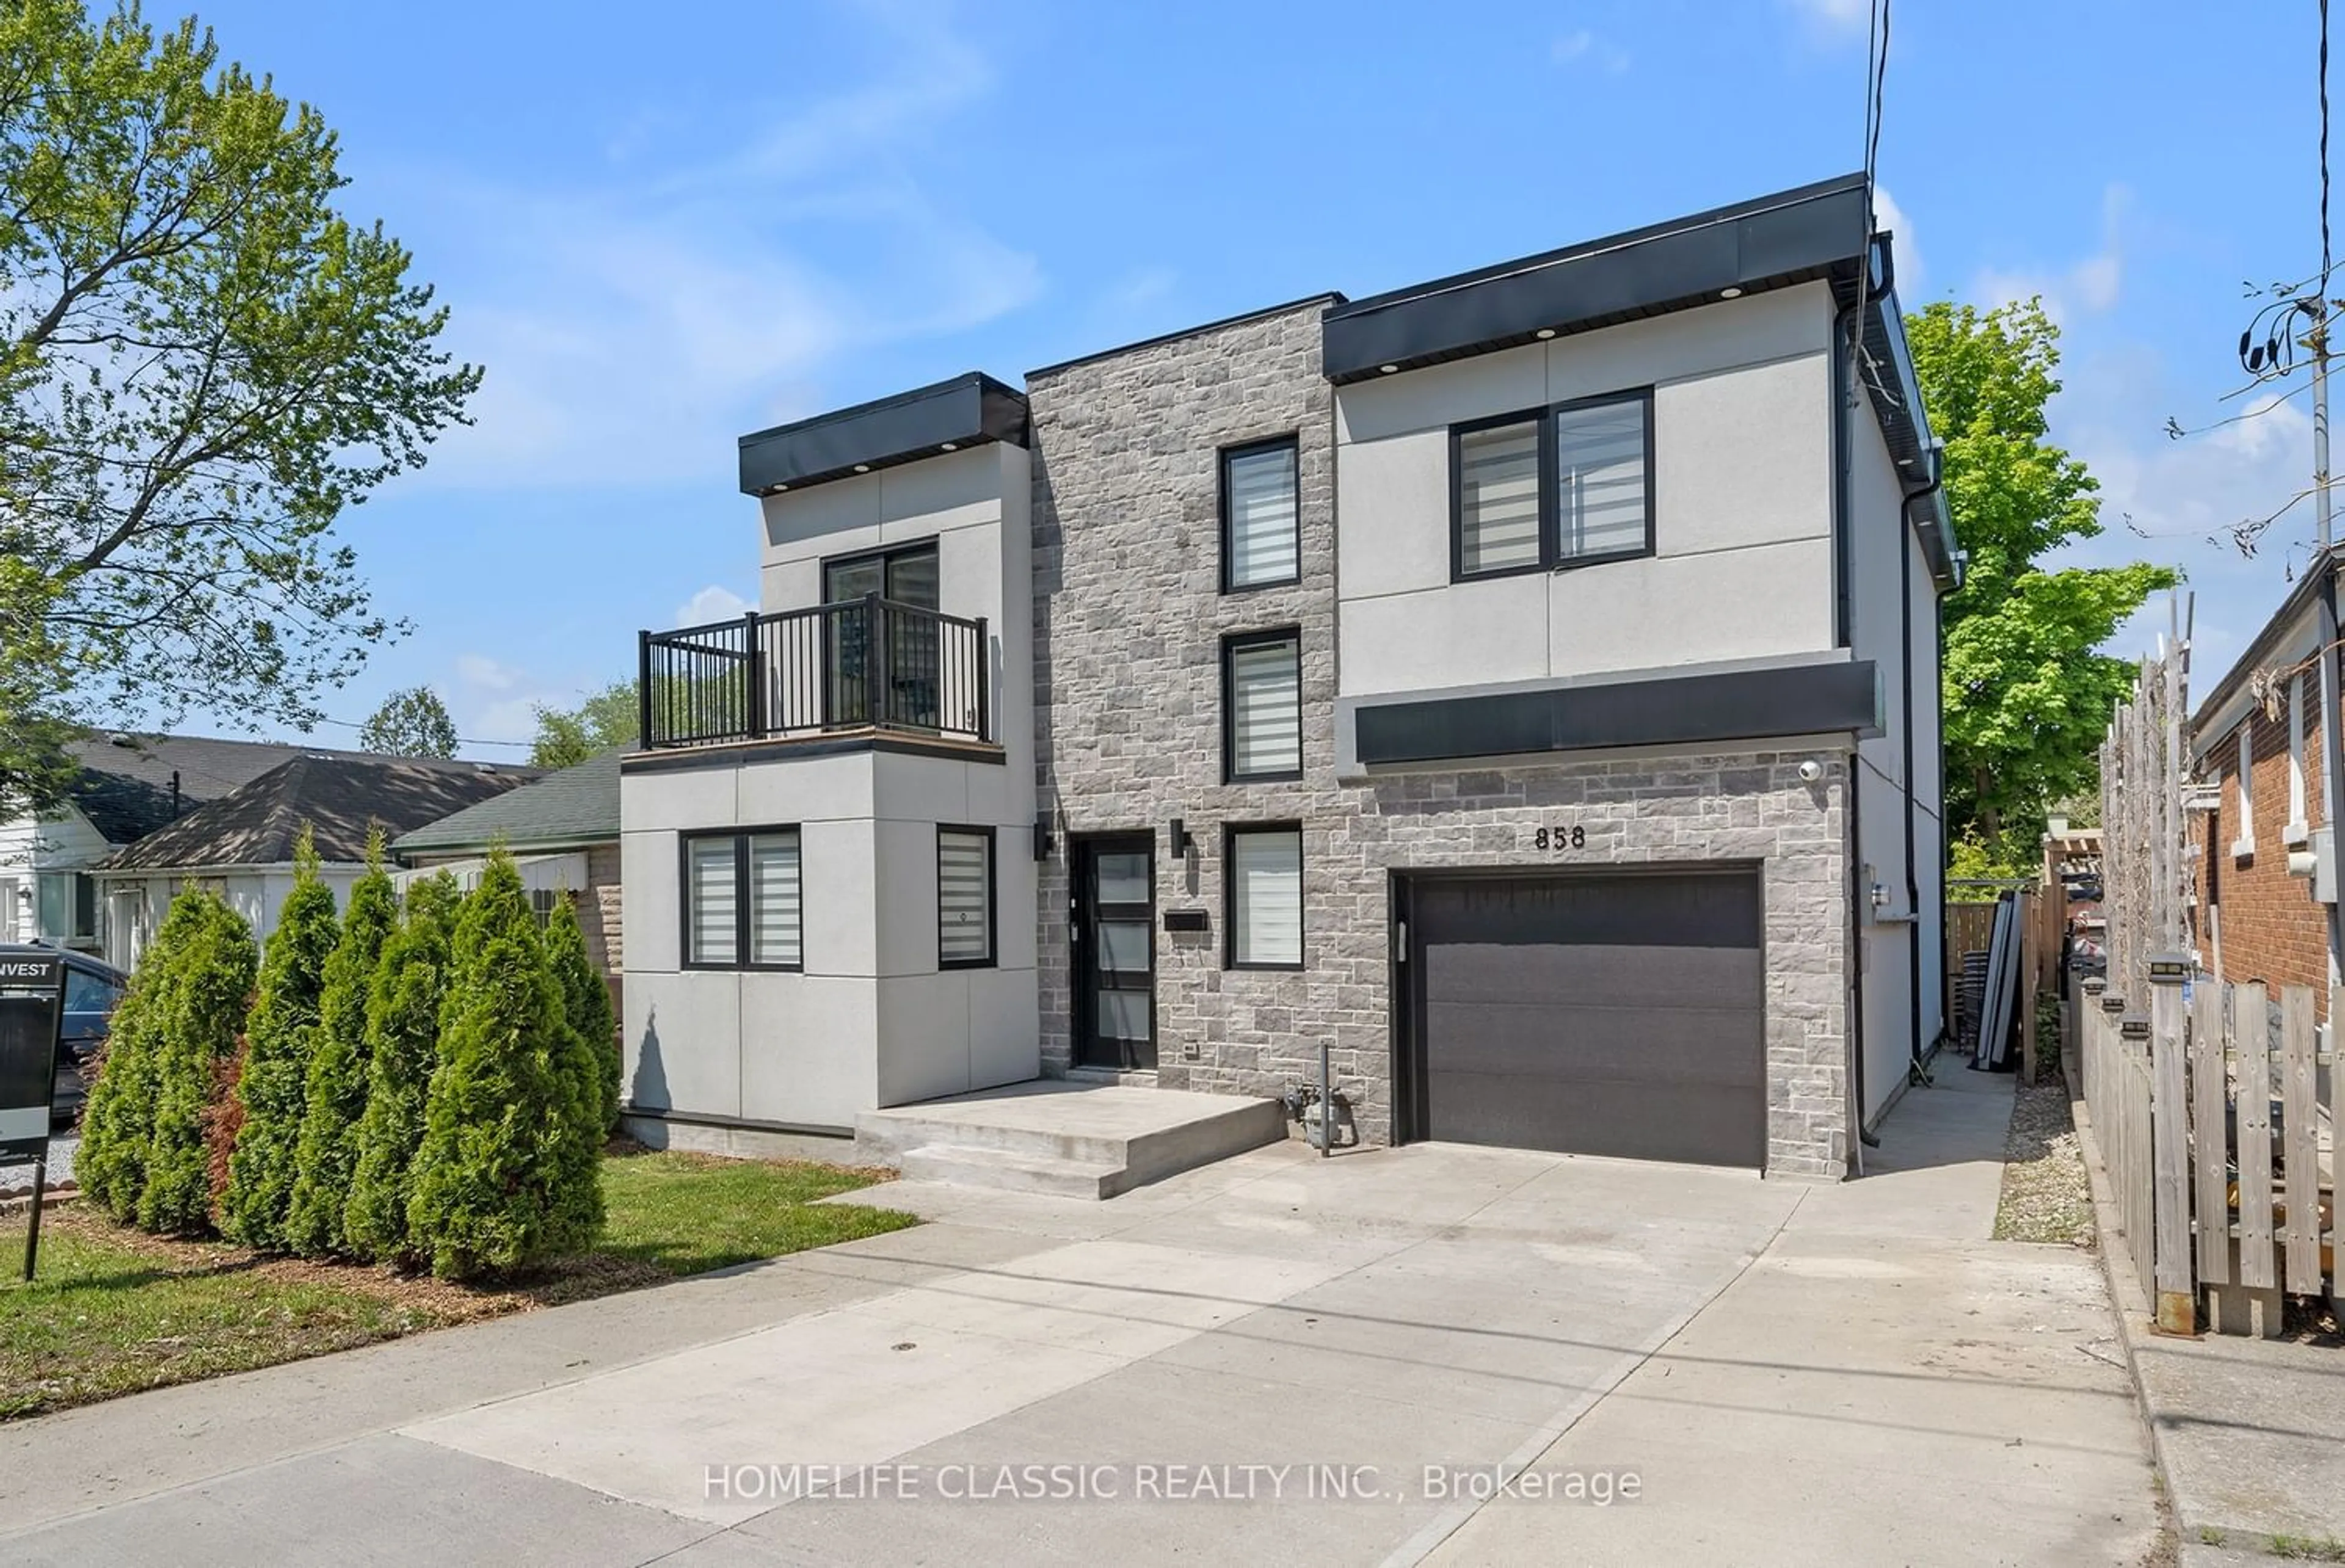 Home with brick exterior material for 858 Danforth Rd, Toronto Ontario M1K 1H5